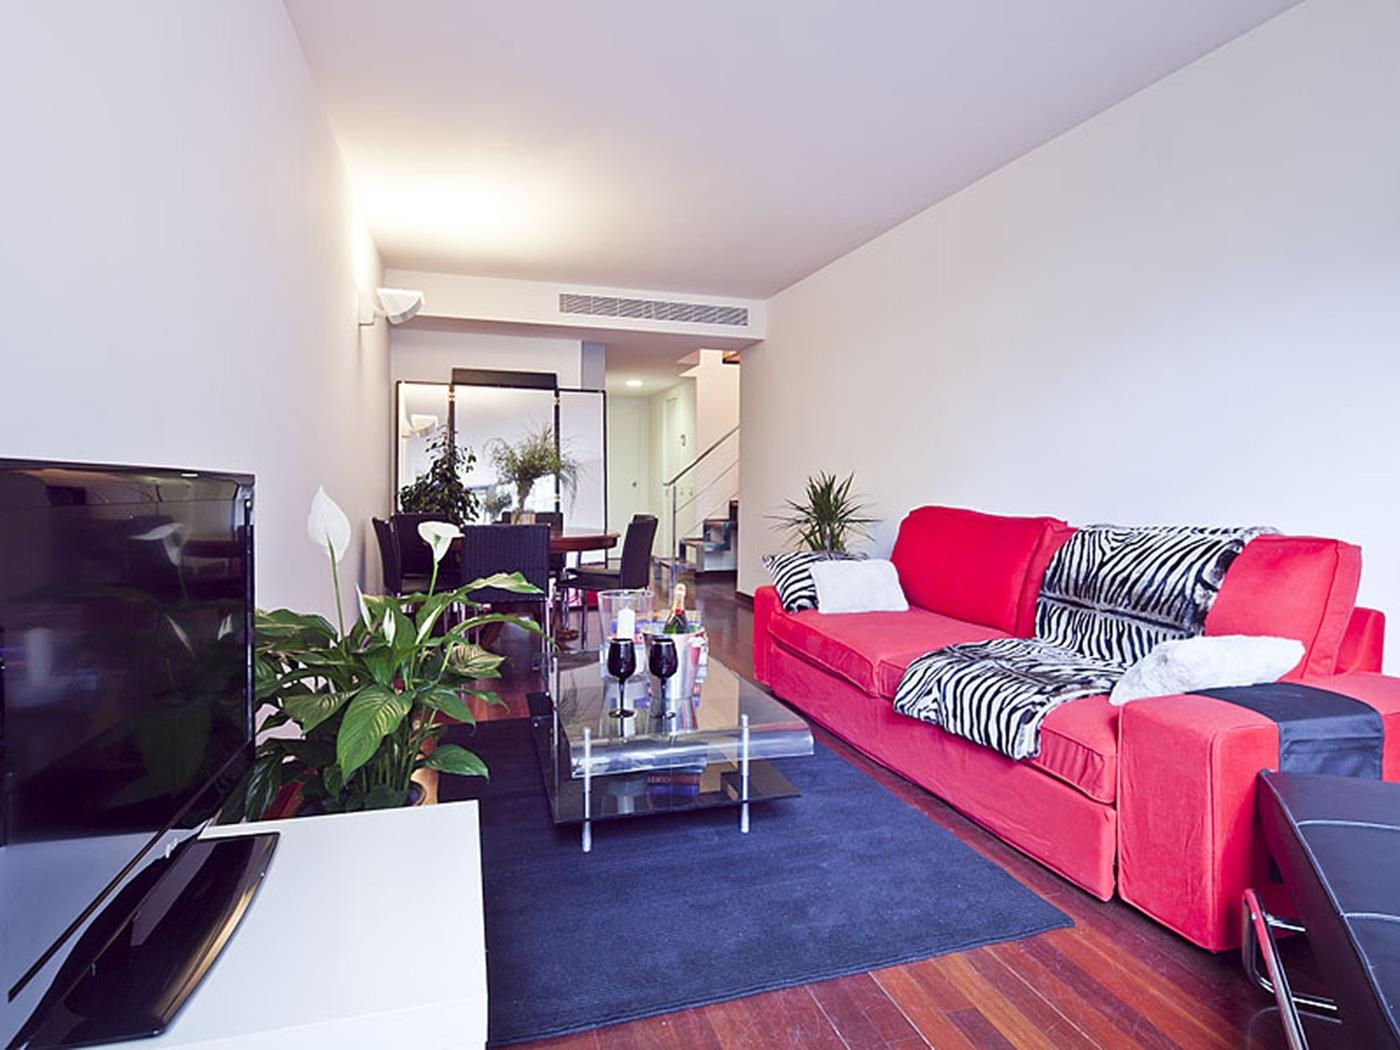 Flat for rent for Erasmus students very close to Business schools - My Space Barcelona Apartments